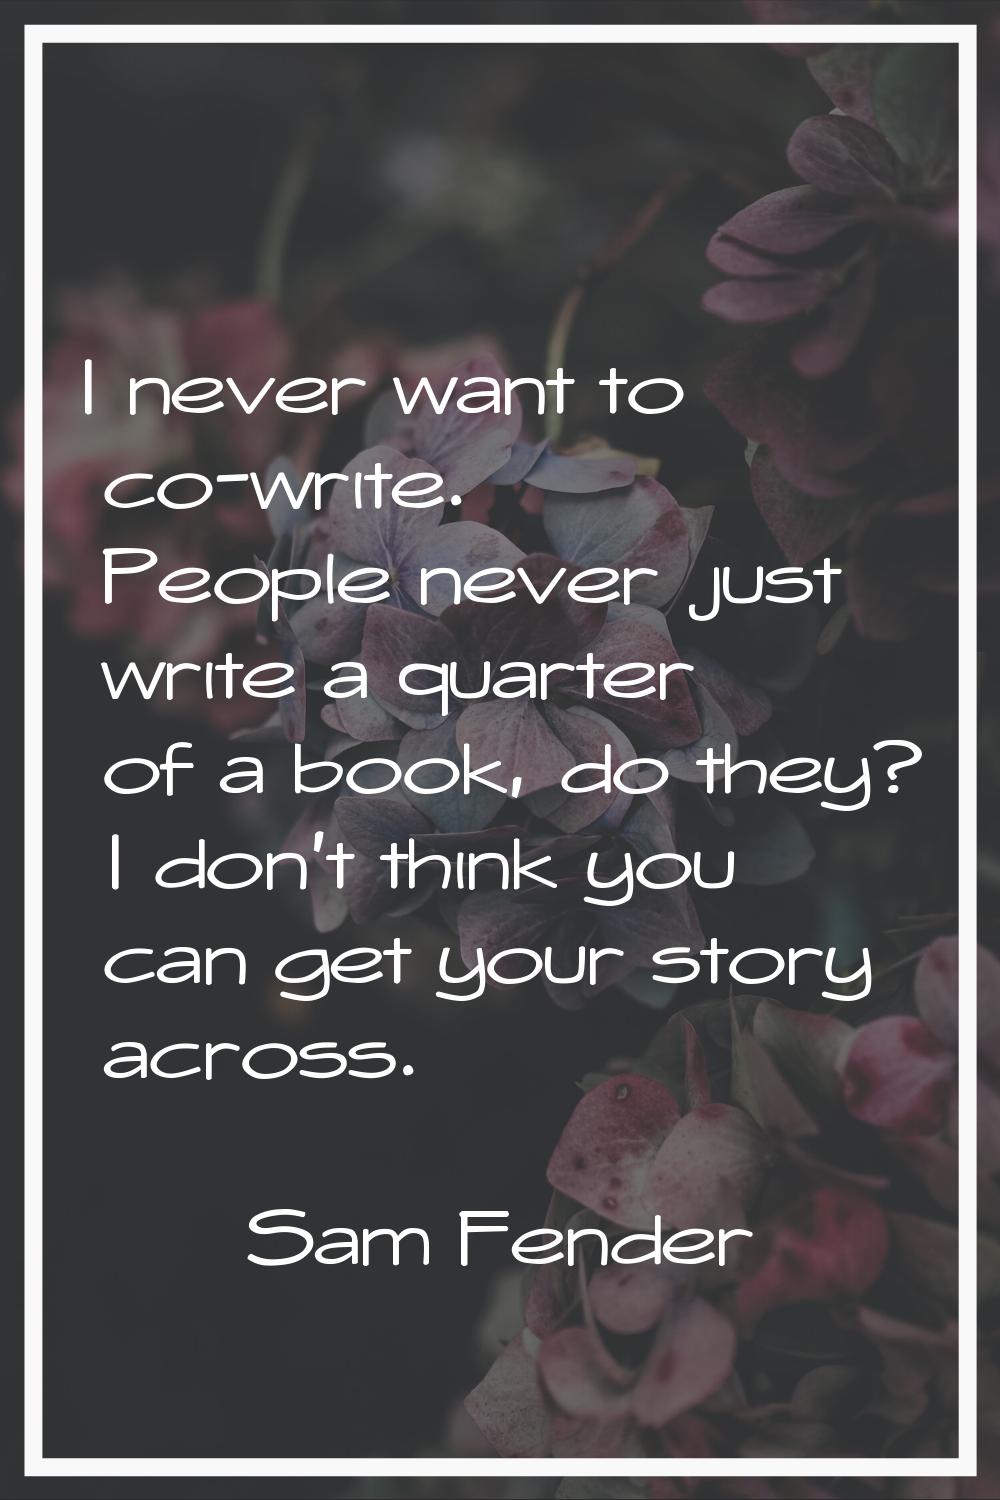 I never want to co-write. People never just write a quarter of a book, do they? I don't think you c